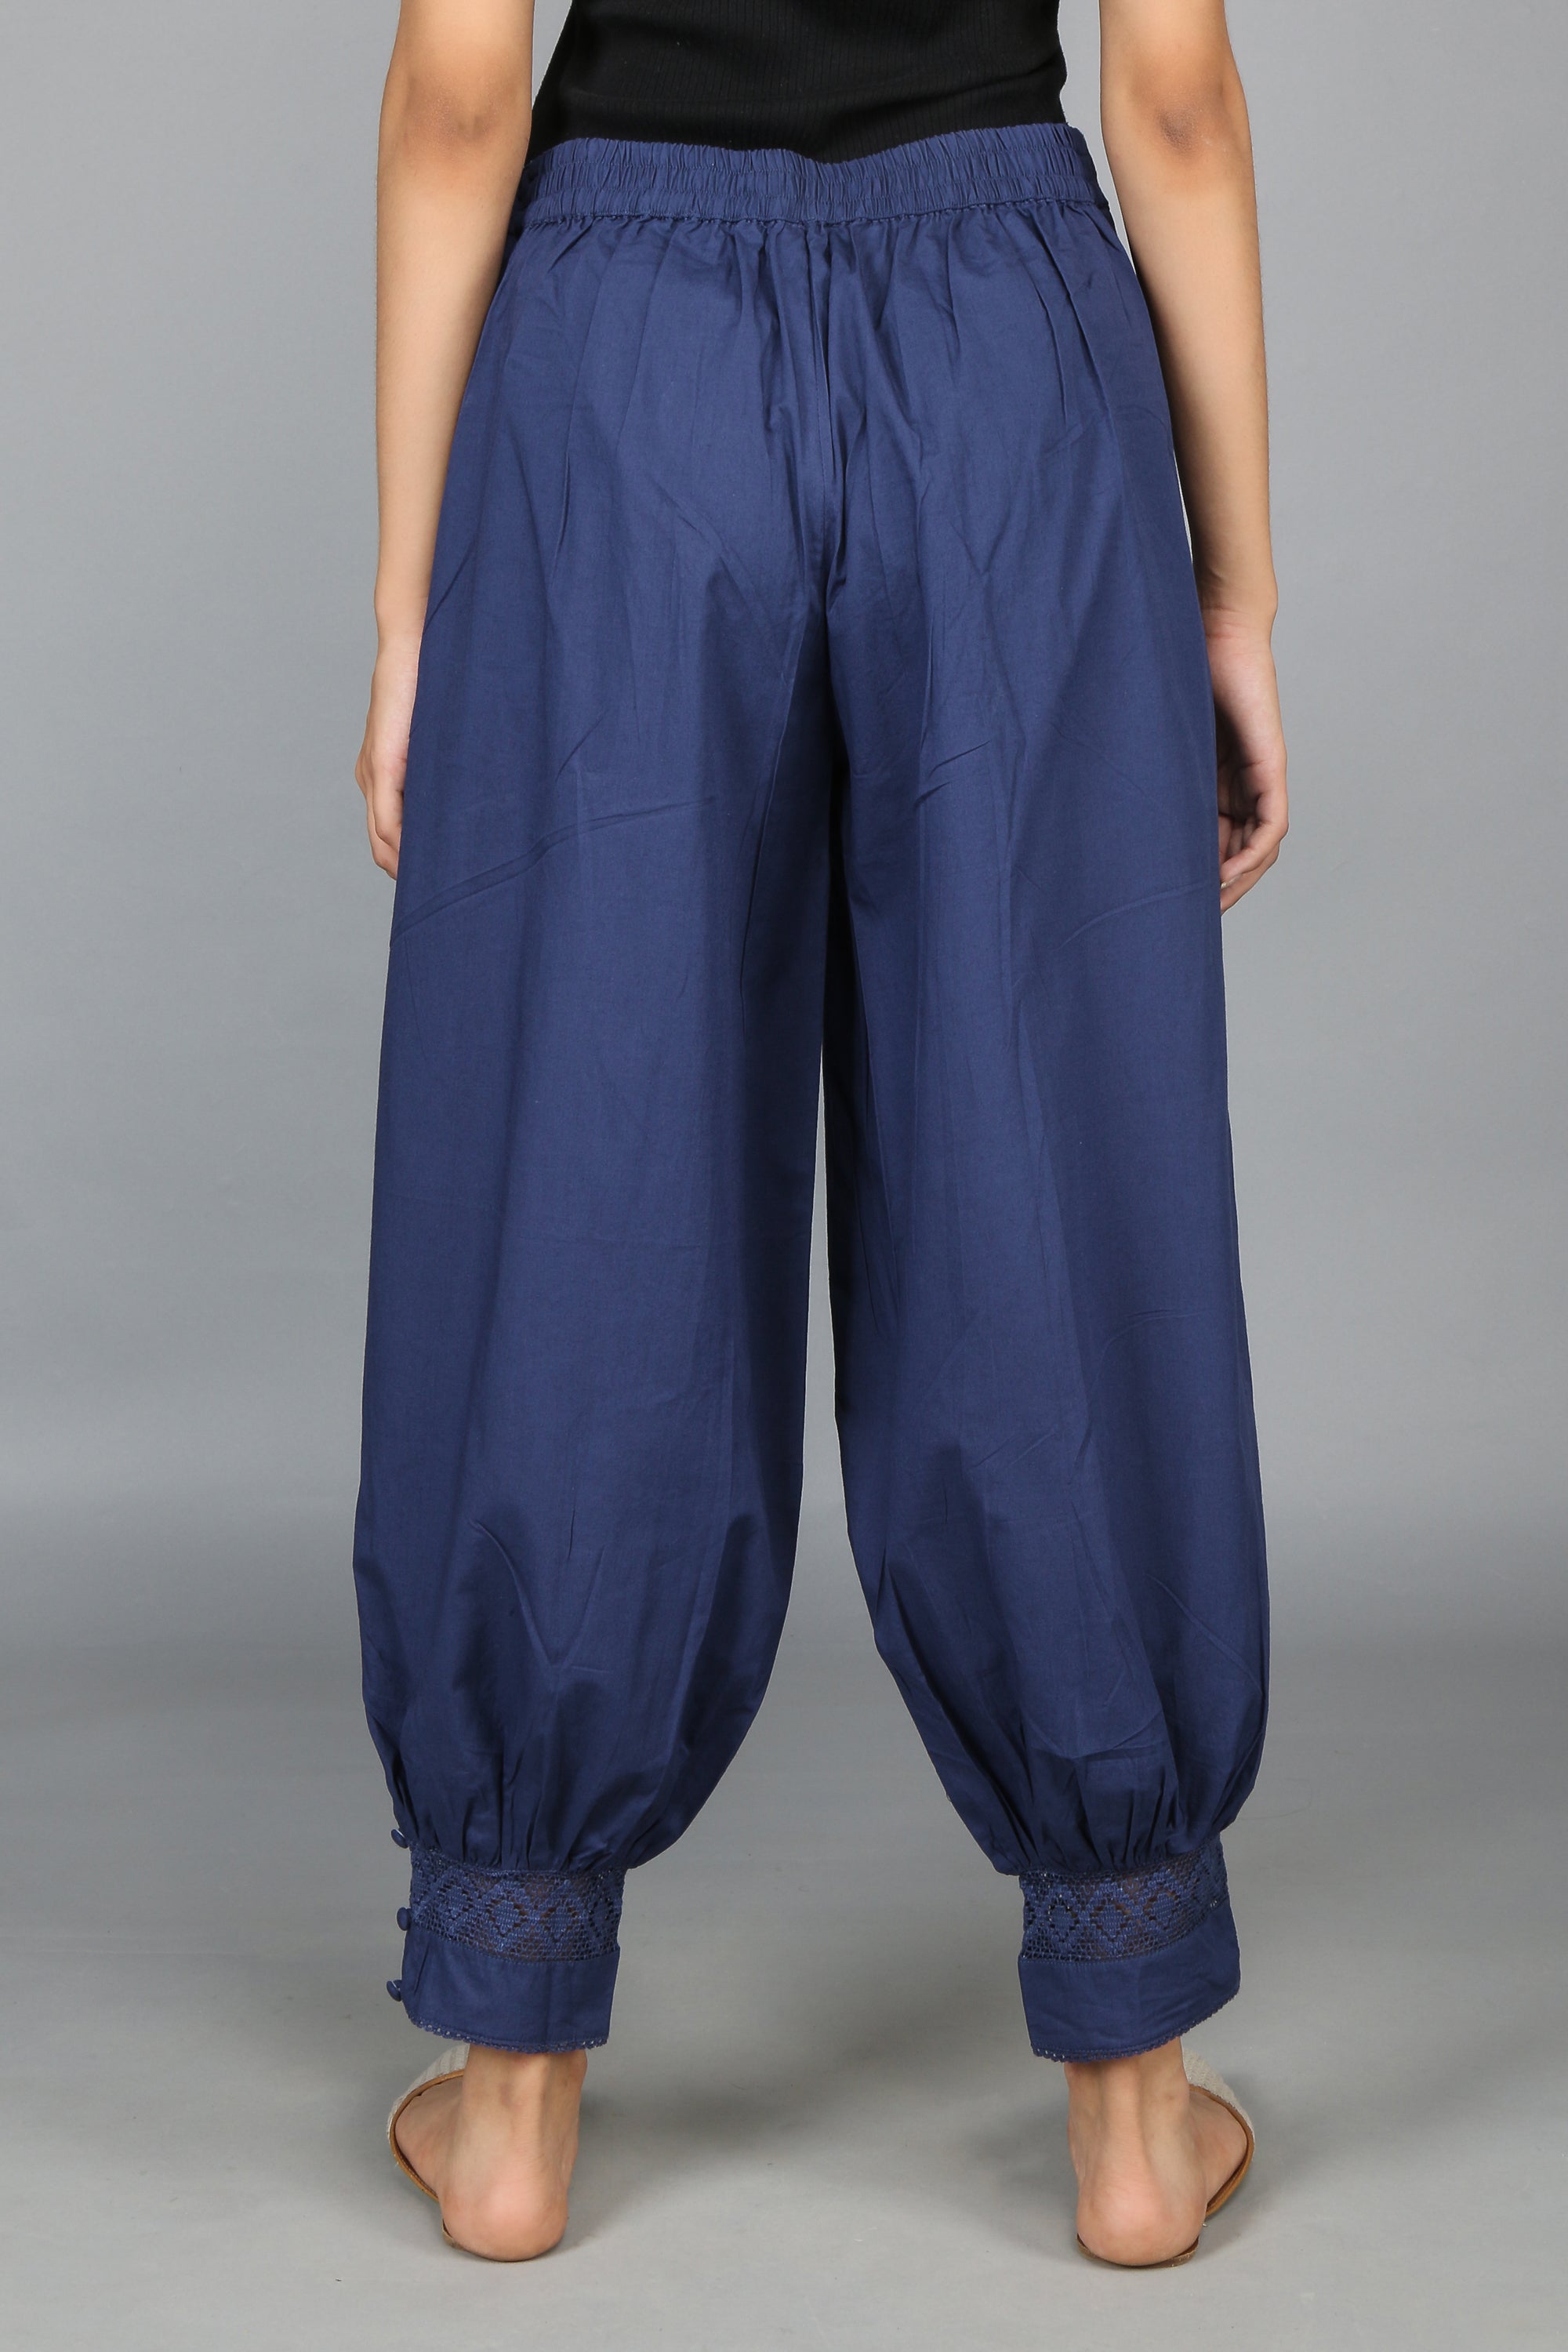 Buy Harem Pant Navy Blue at Amazon.in